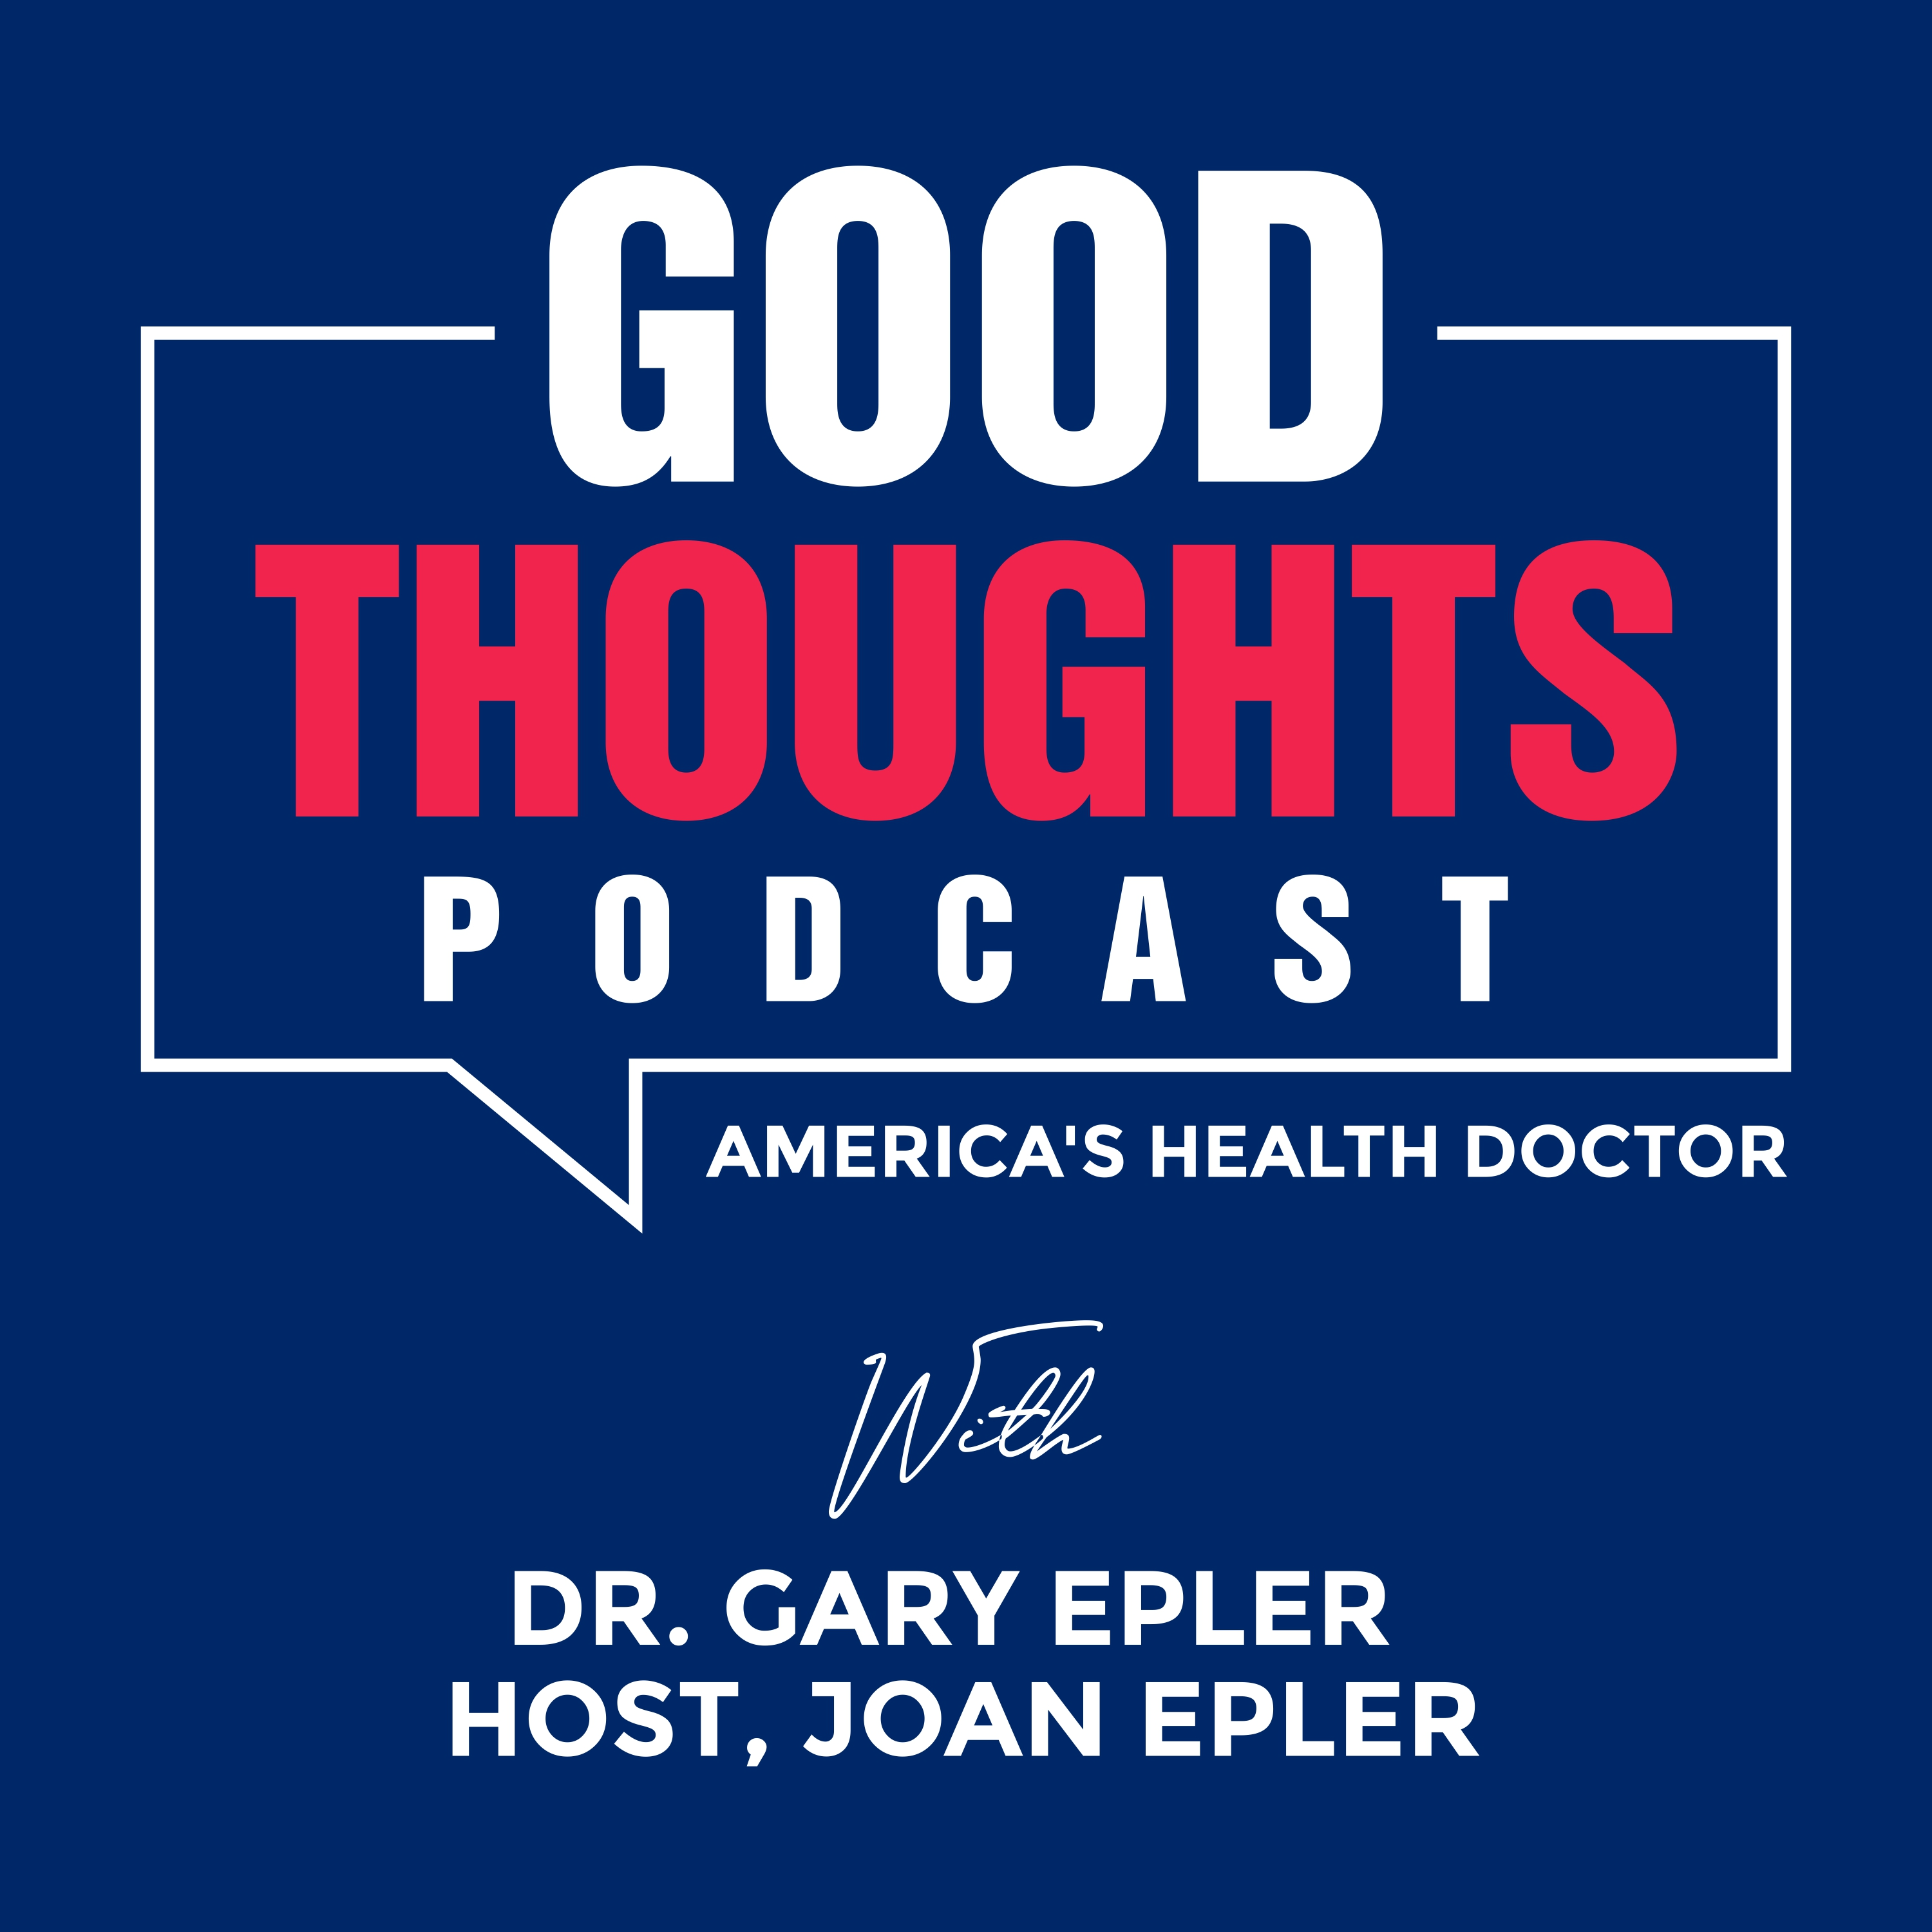 Good Thoughts Podcast with Dr. Gary Epler hosted by Joan Epler